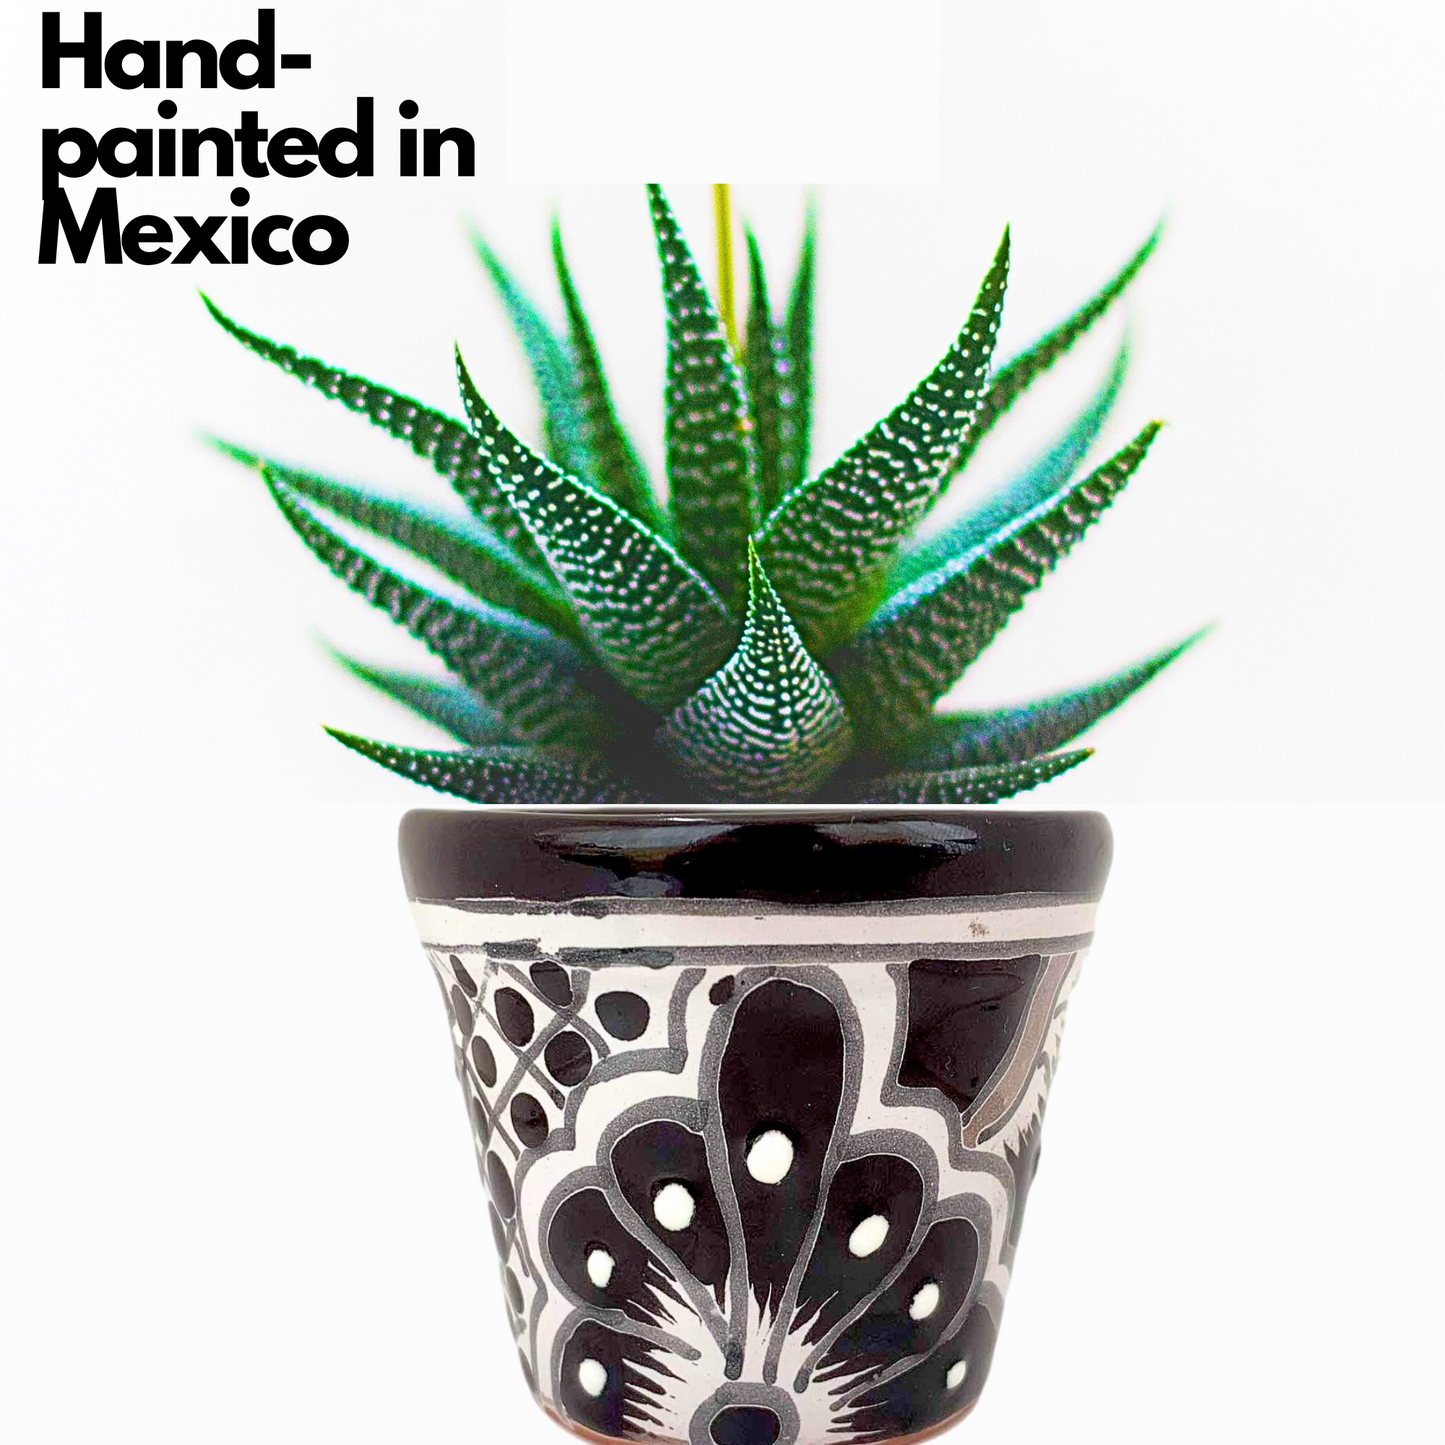 hand painted in mexico Black and WhiteTalavera Ceramic Succulent Plant Pots - Hand-Painted Mexican Artistry by Casa Fiesta Designs.